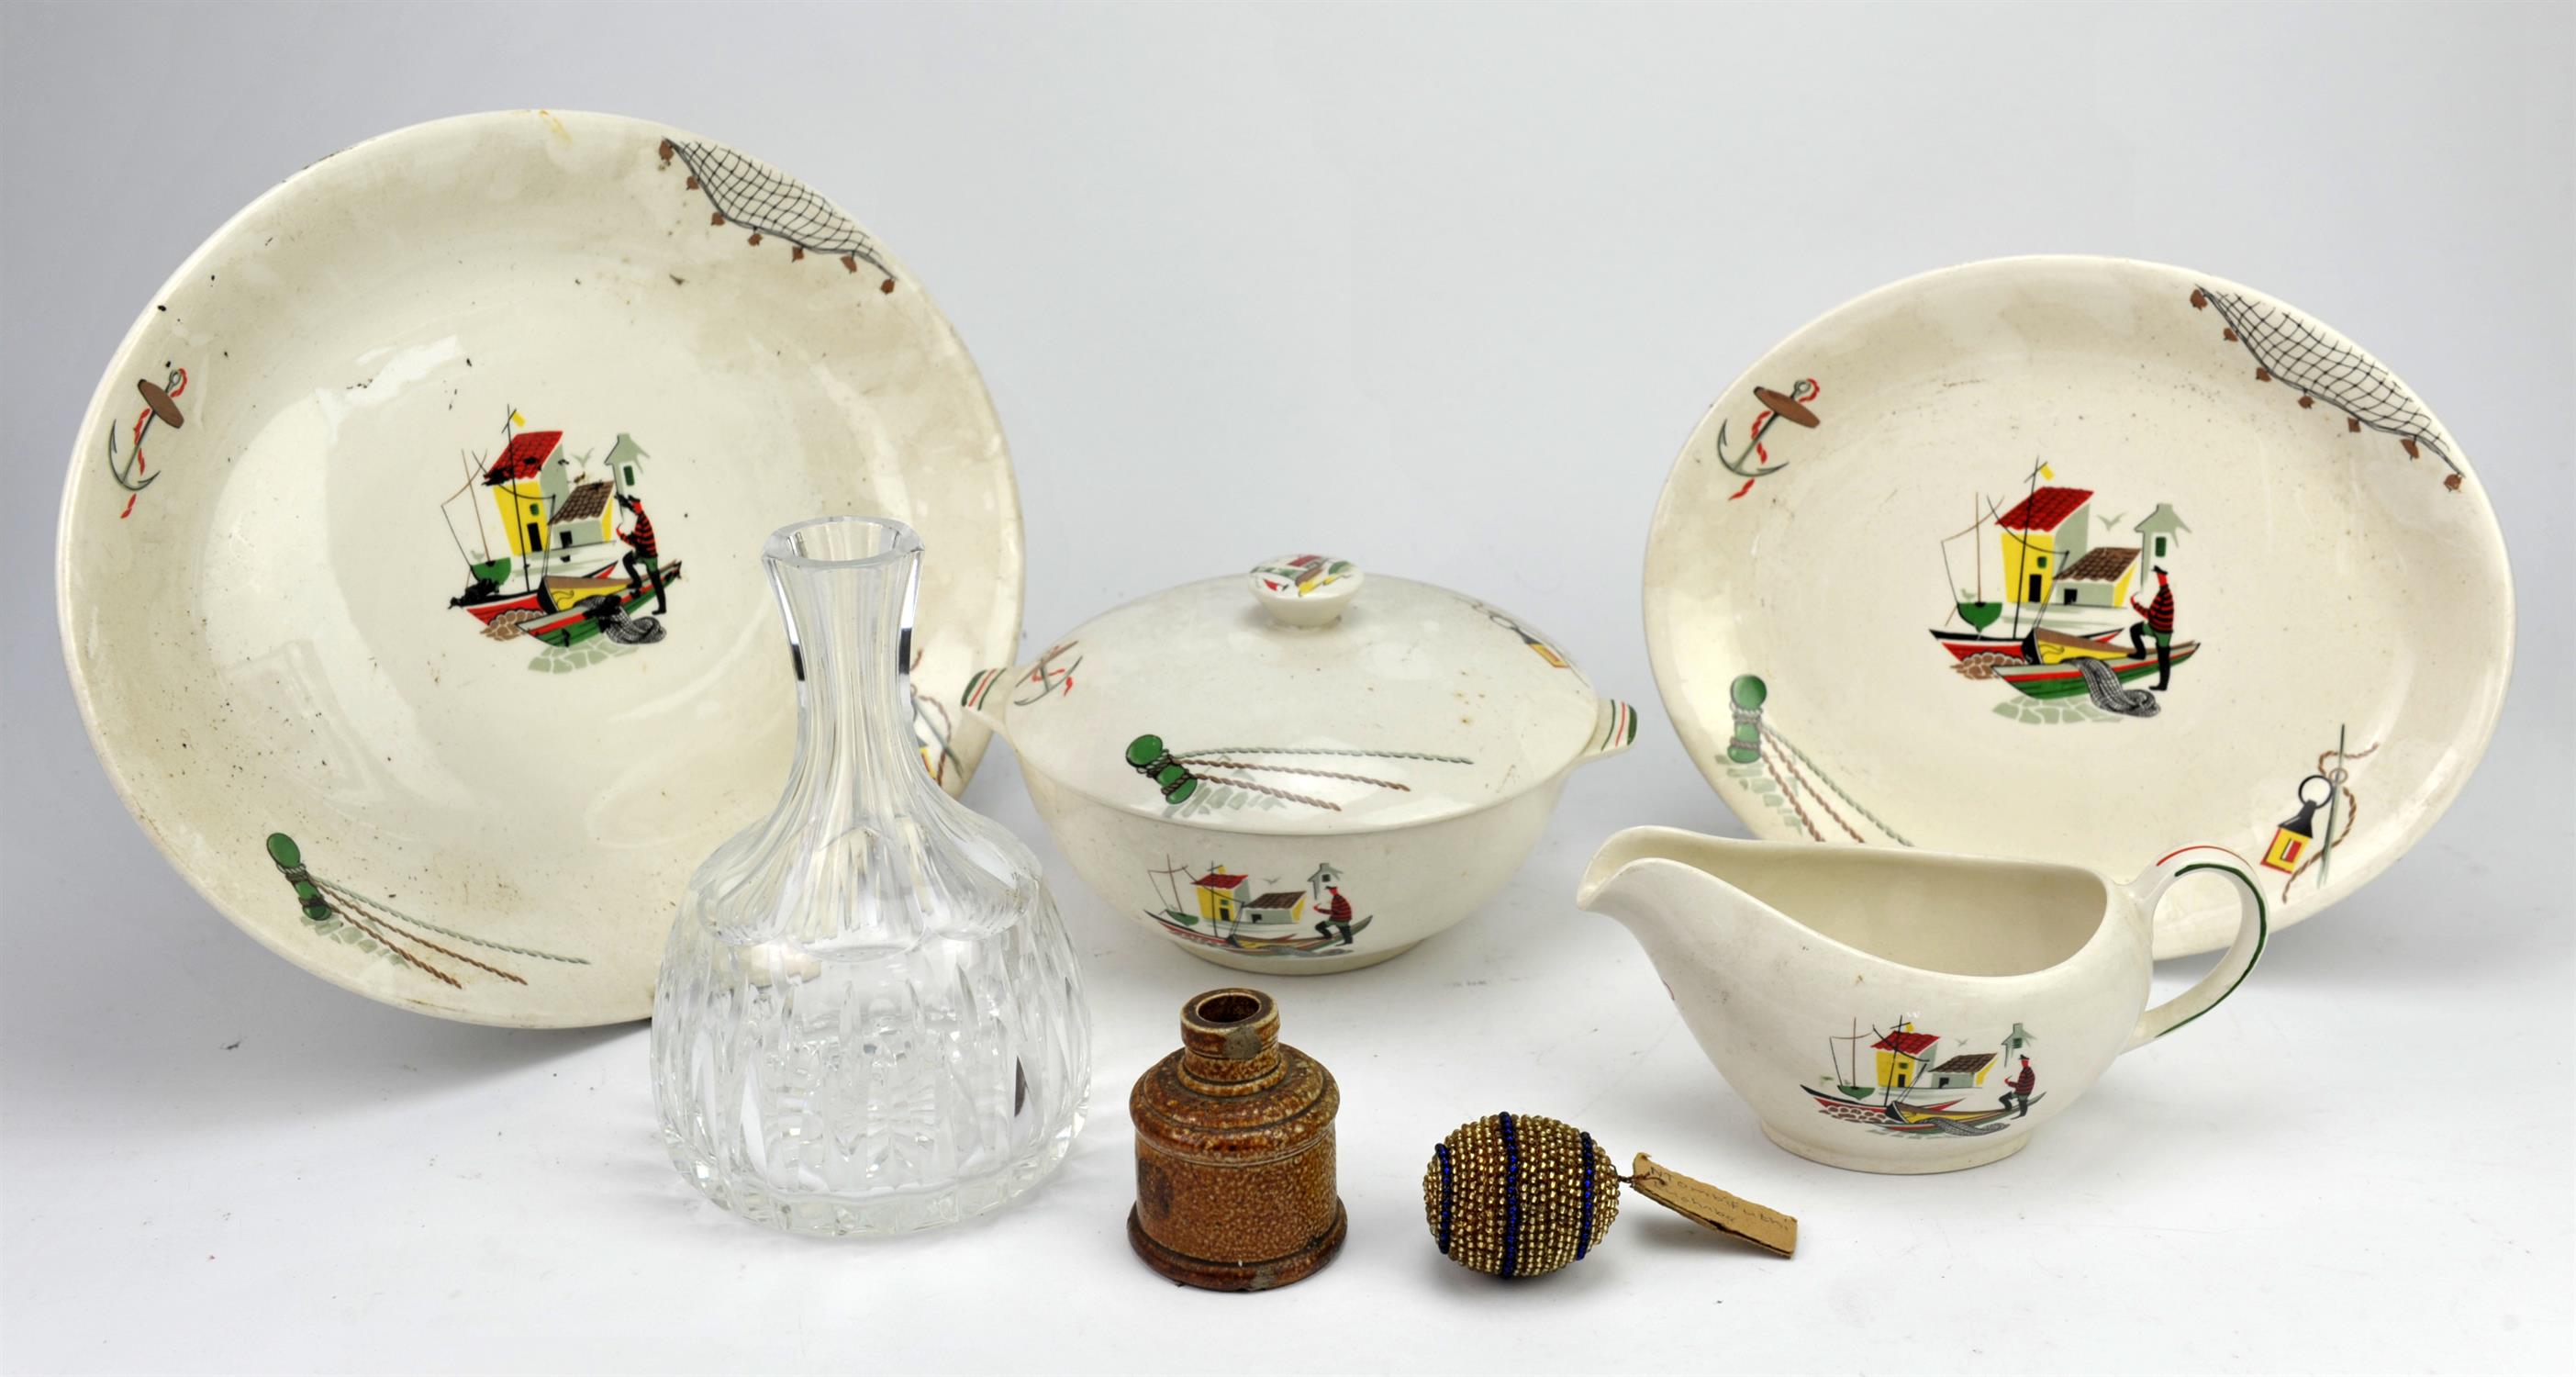 Alfred Meakin "Brixham" part dinner service, two decanters, and other decorative items